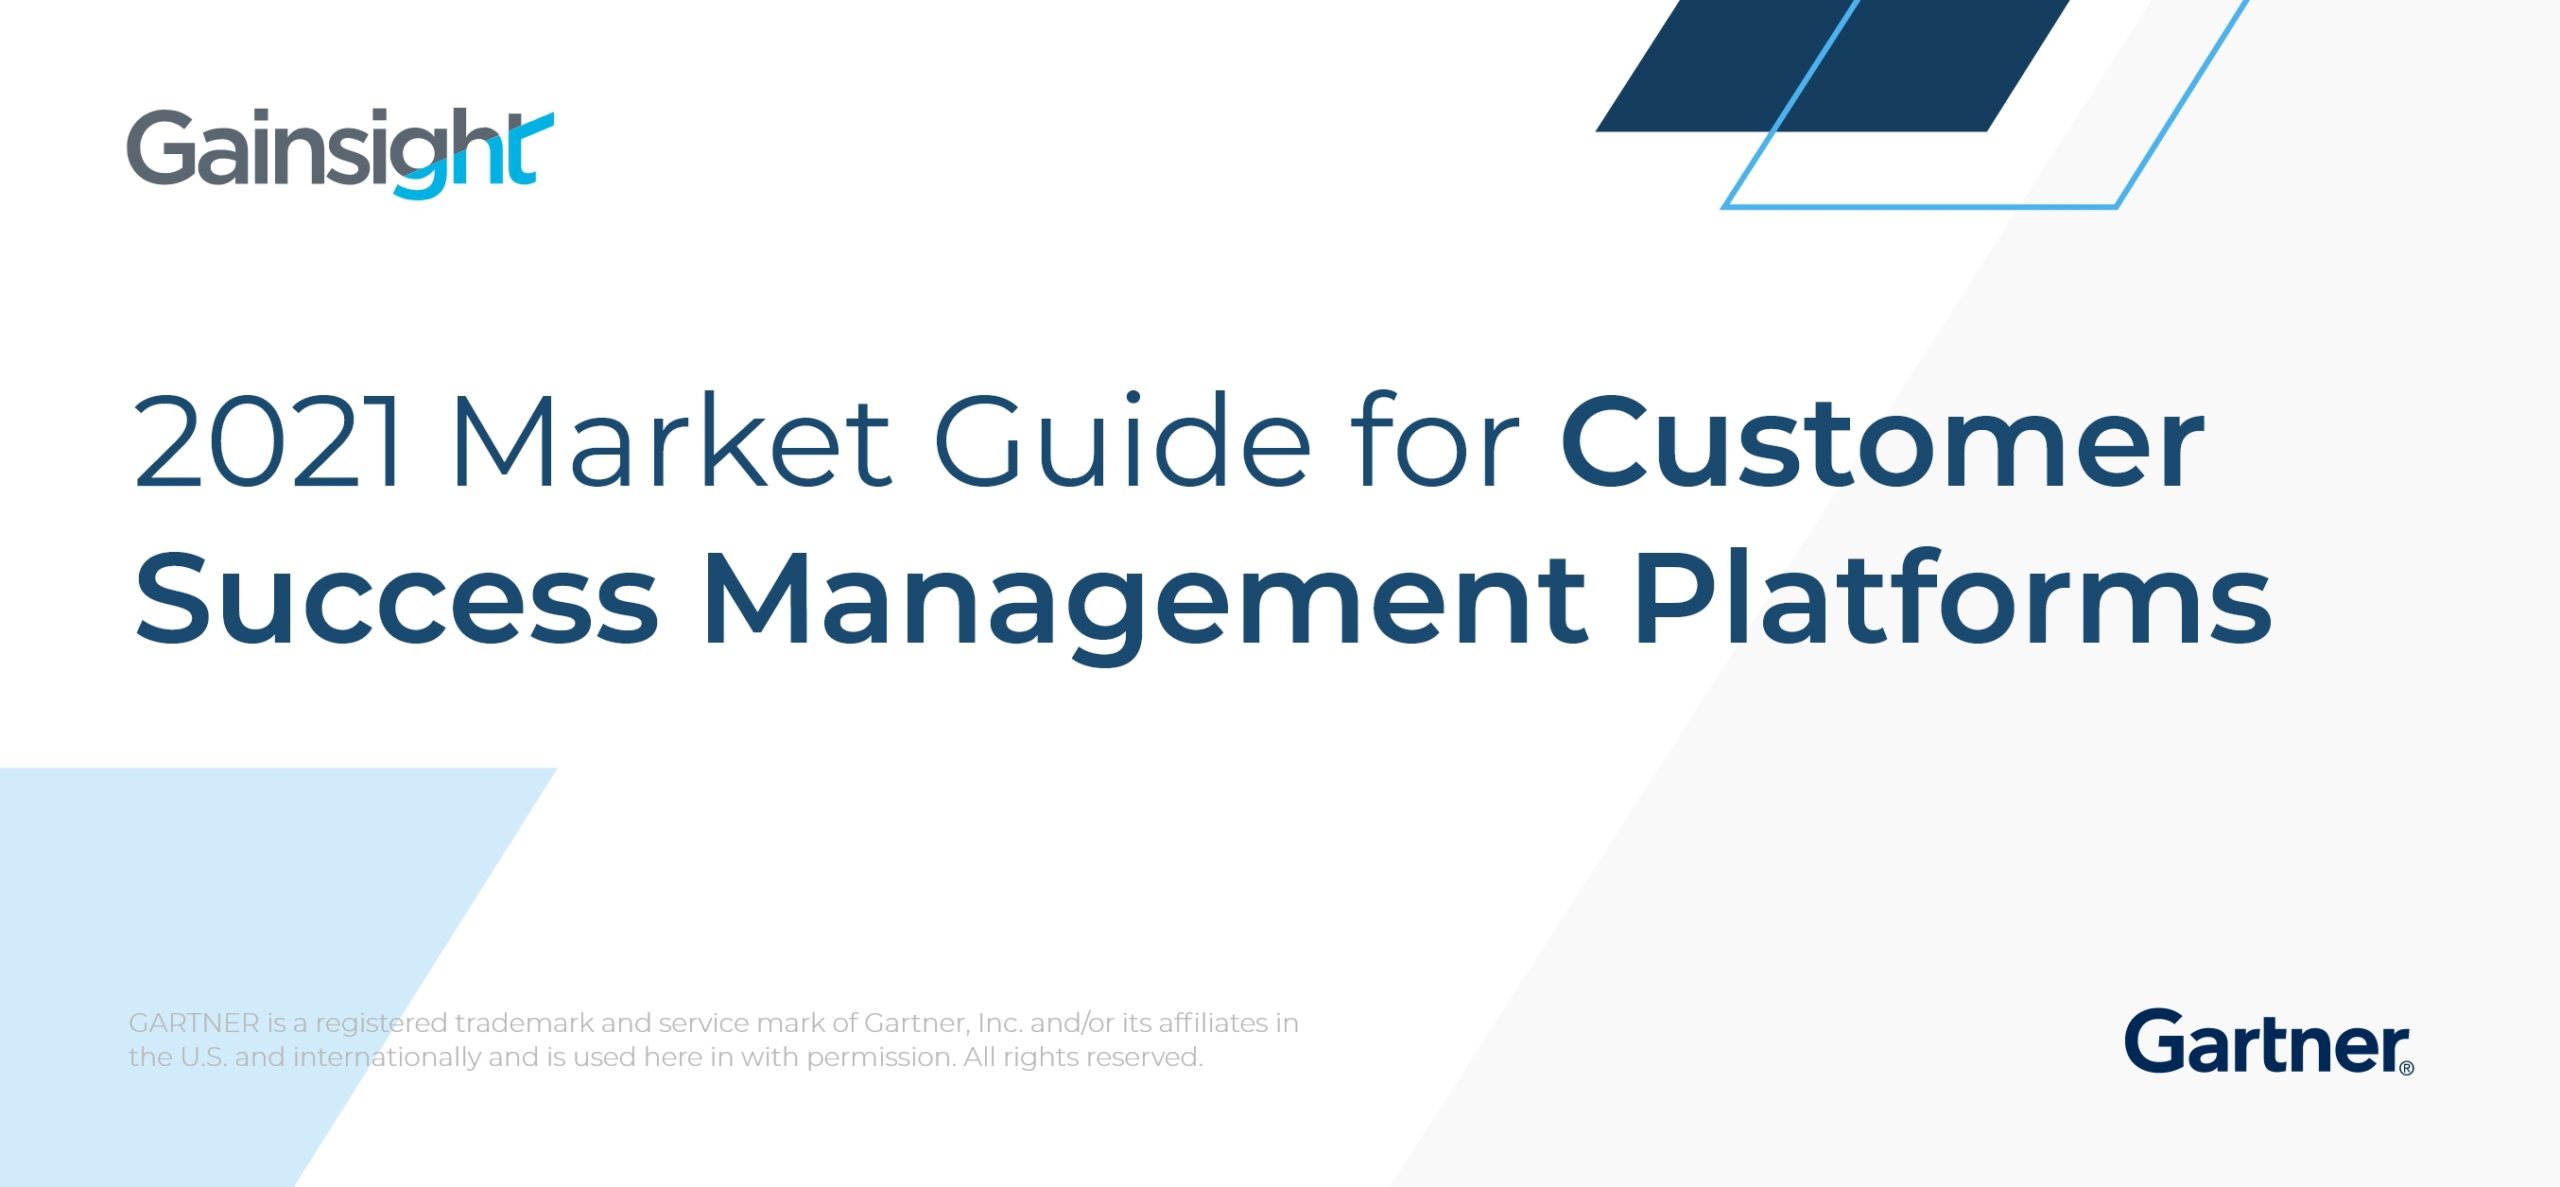 Our Top Takeaways From The Gartner 2021 Market Guide for Customer Success Management Platforms Image